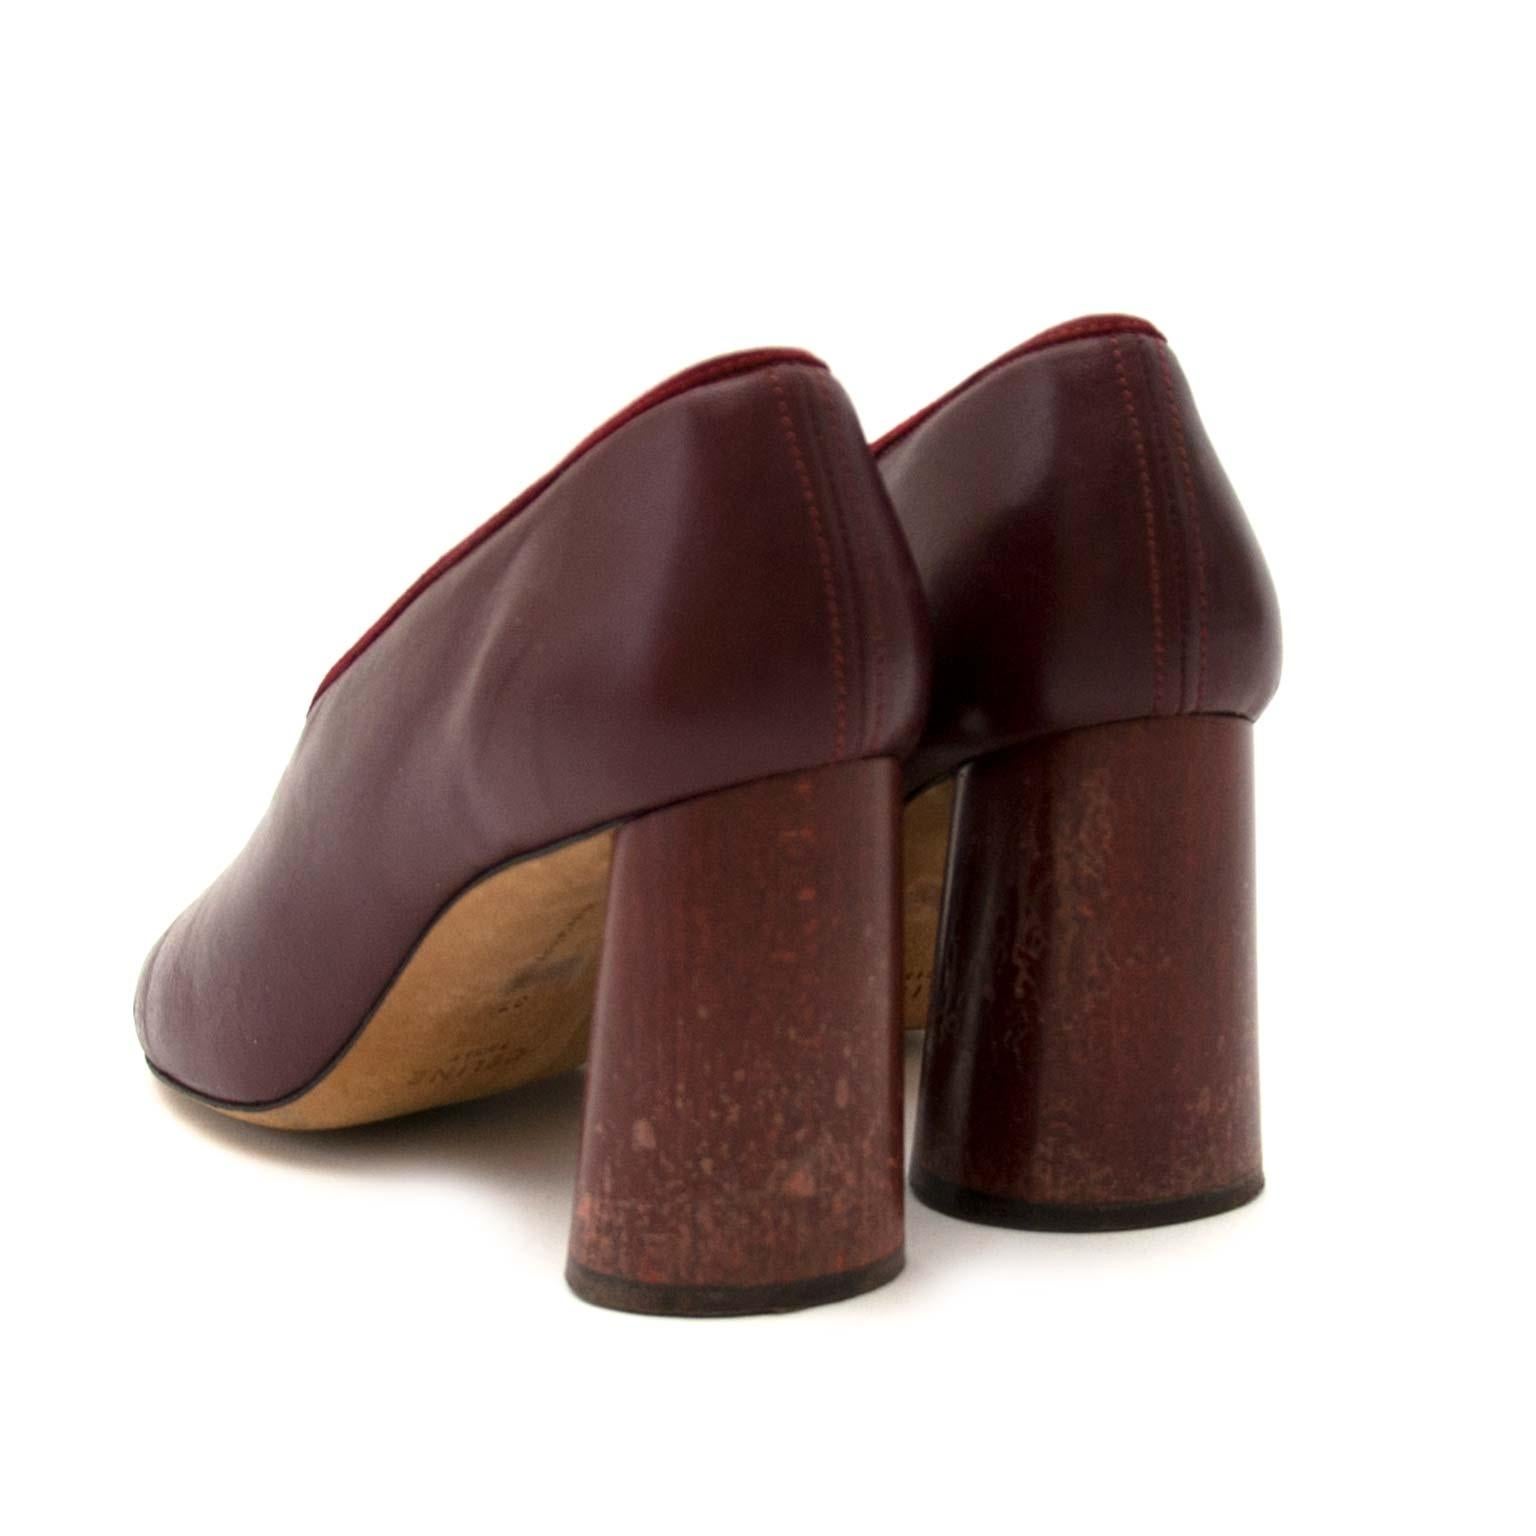 Good preloved condition

Céline Paris V Neck Barrel Heel Leather Pump - Size 37

These classy Céline pumps with a V Neck design are the perfect addition to your shoe closet.

They are made of beautiful bordeaux leather with suede bordeaux lining. 